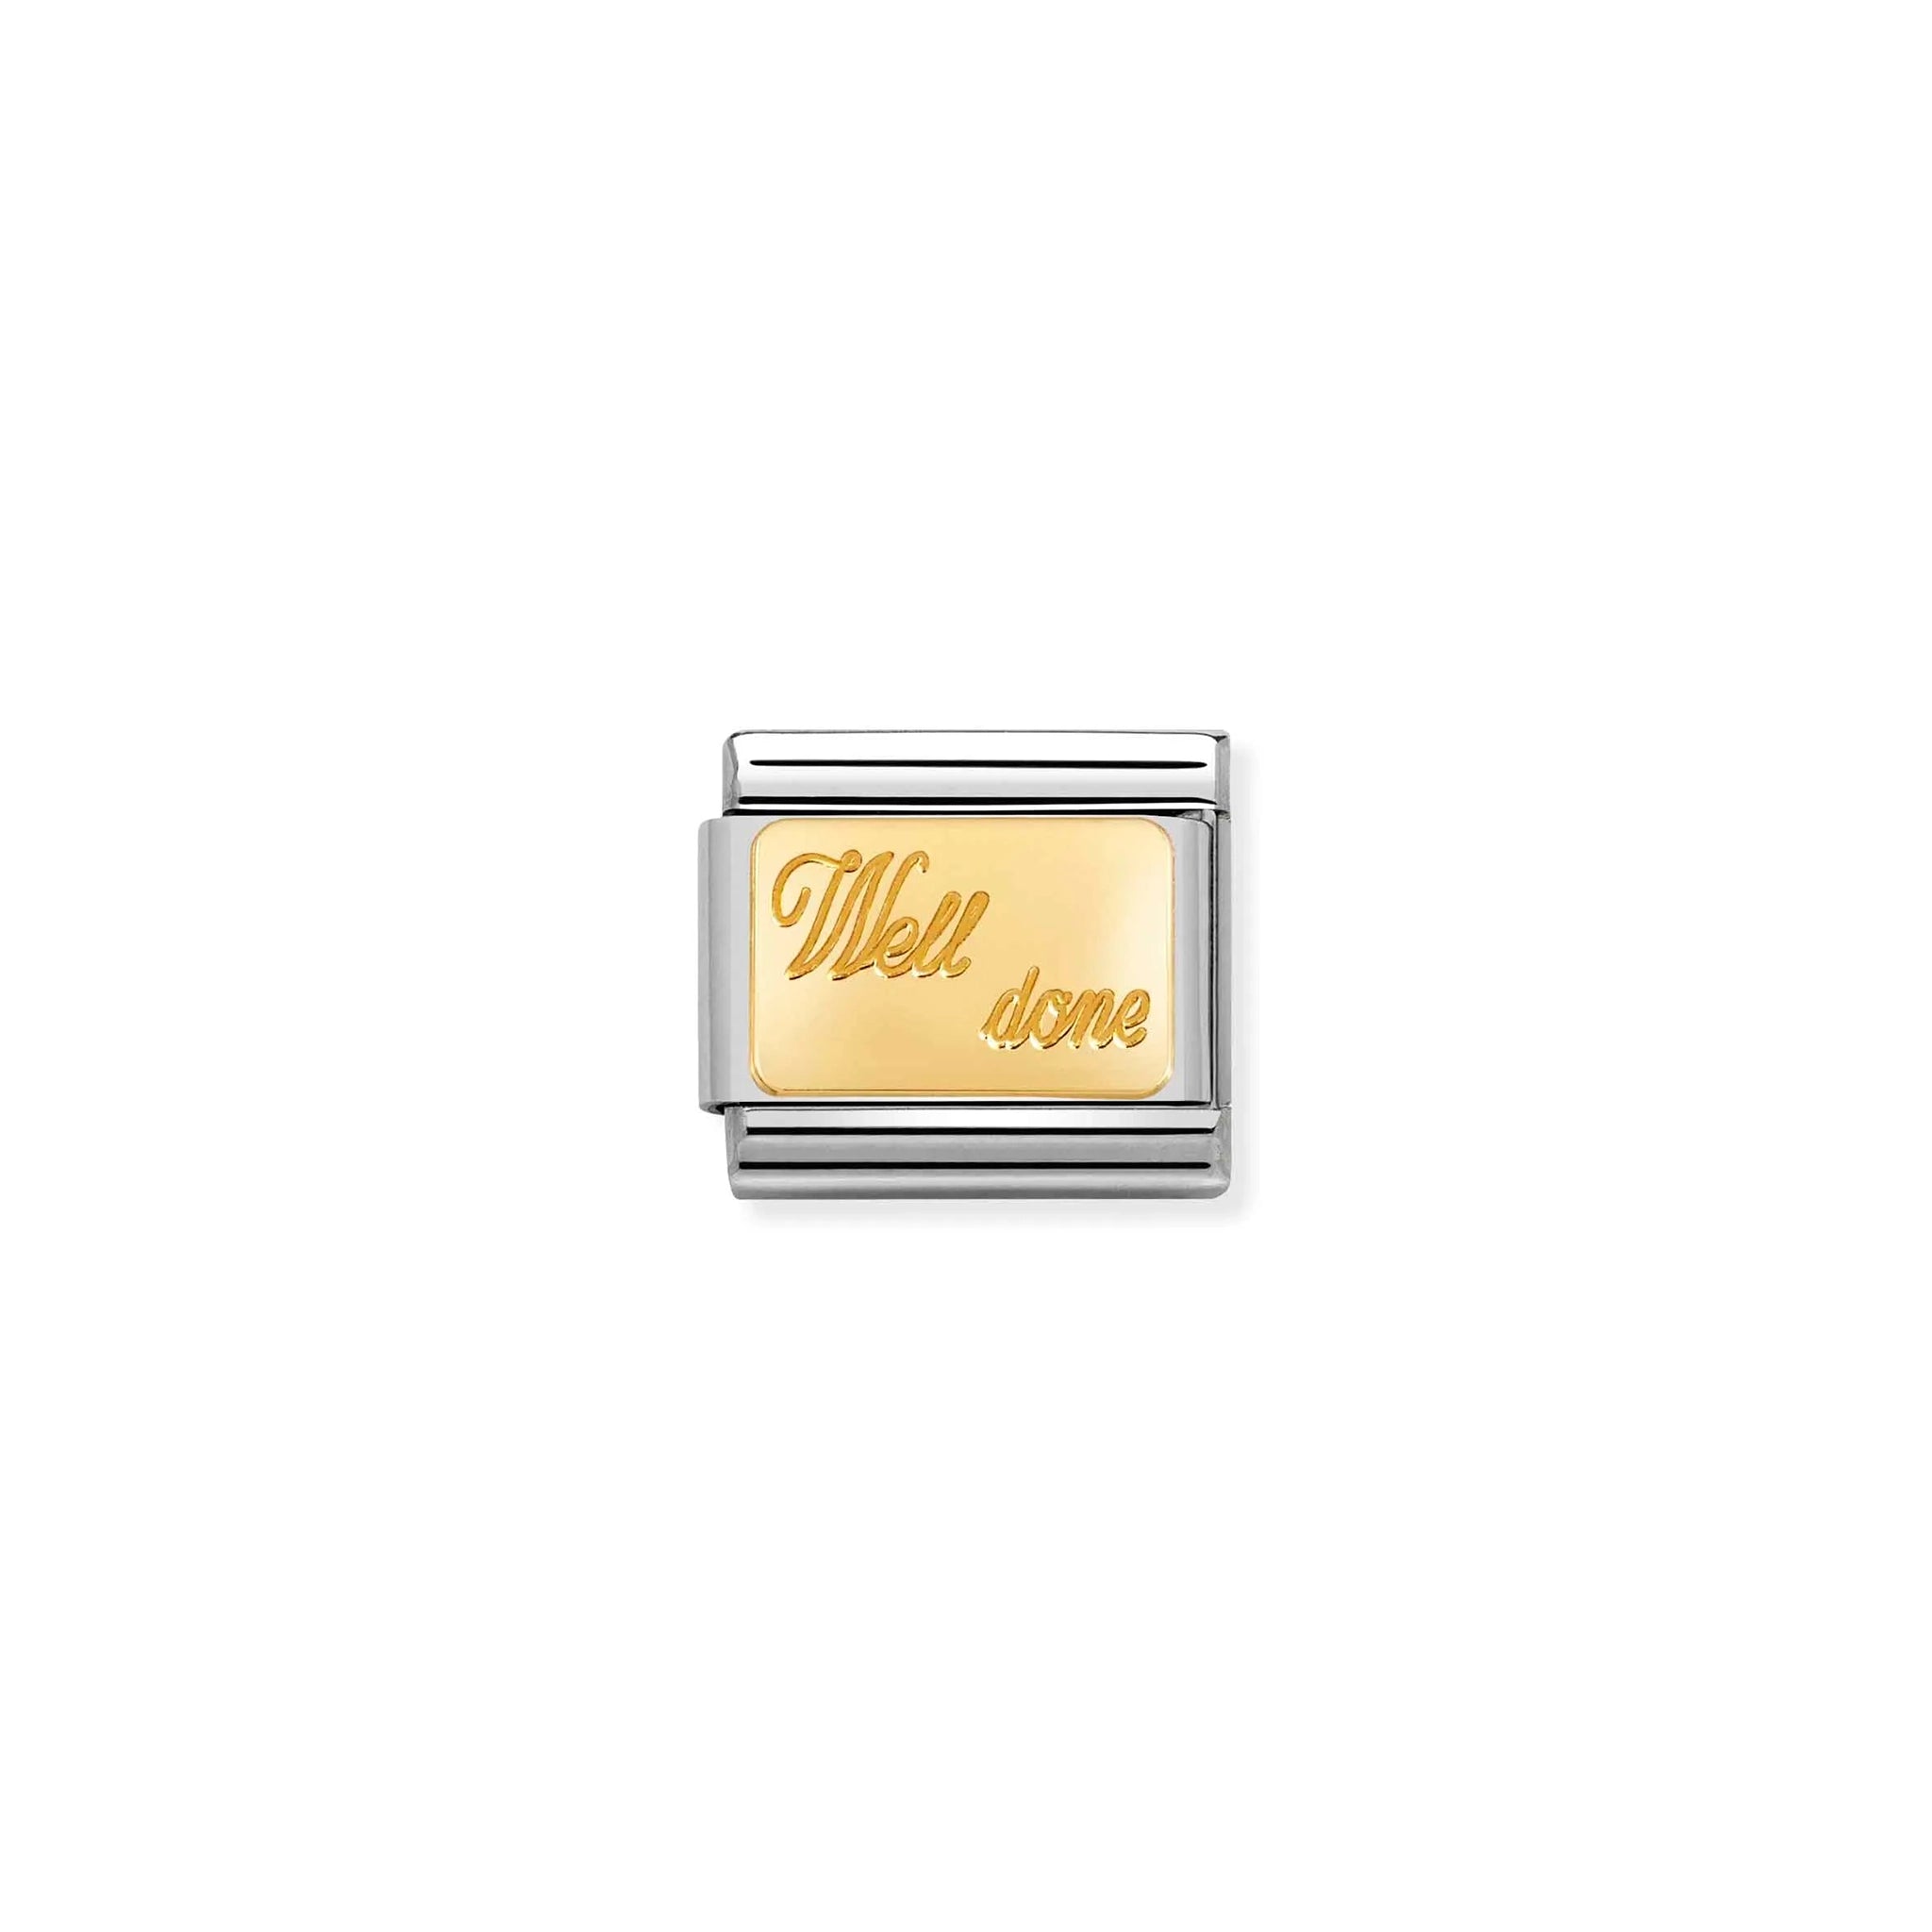 A Nomination charm link featuring a gold plaque engraved with 'well done'